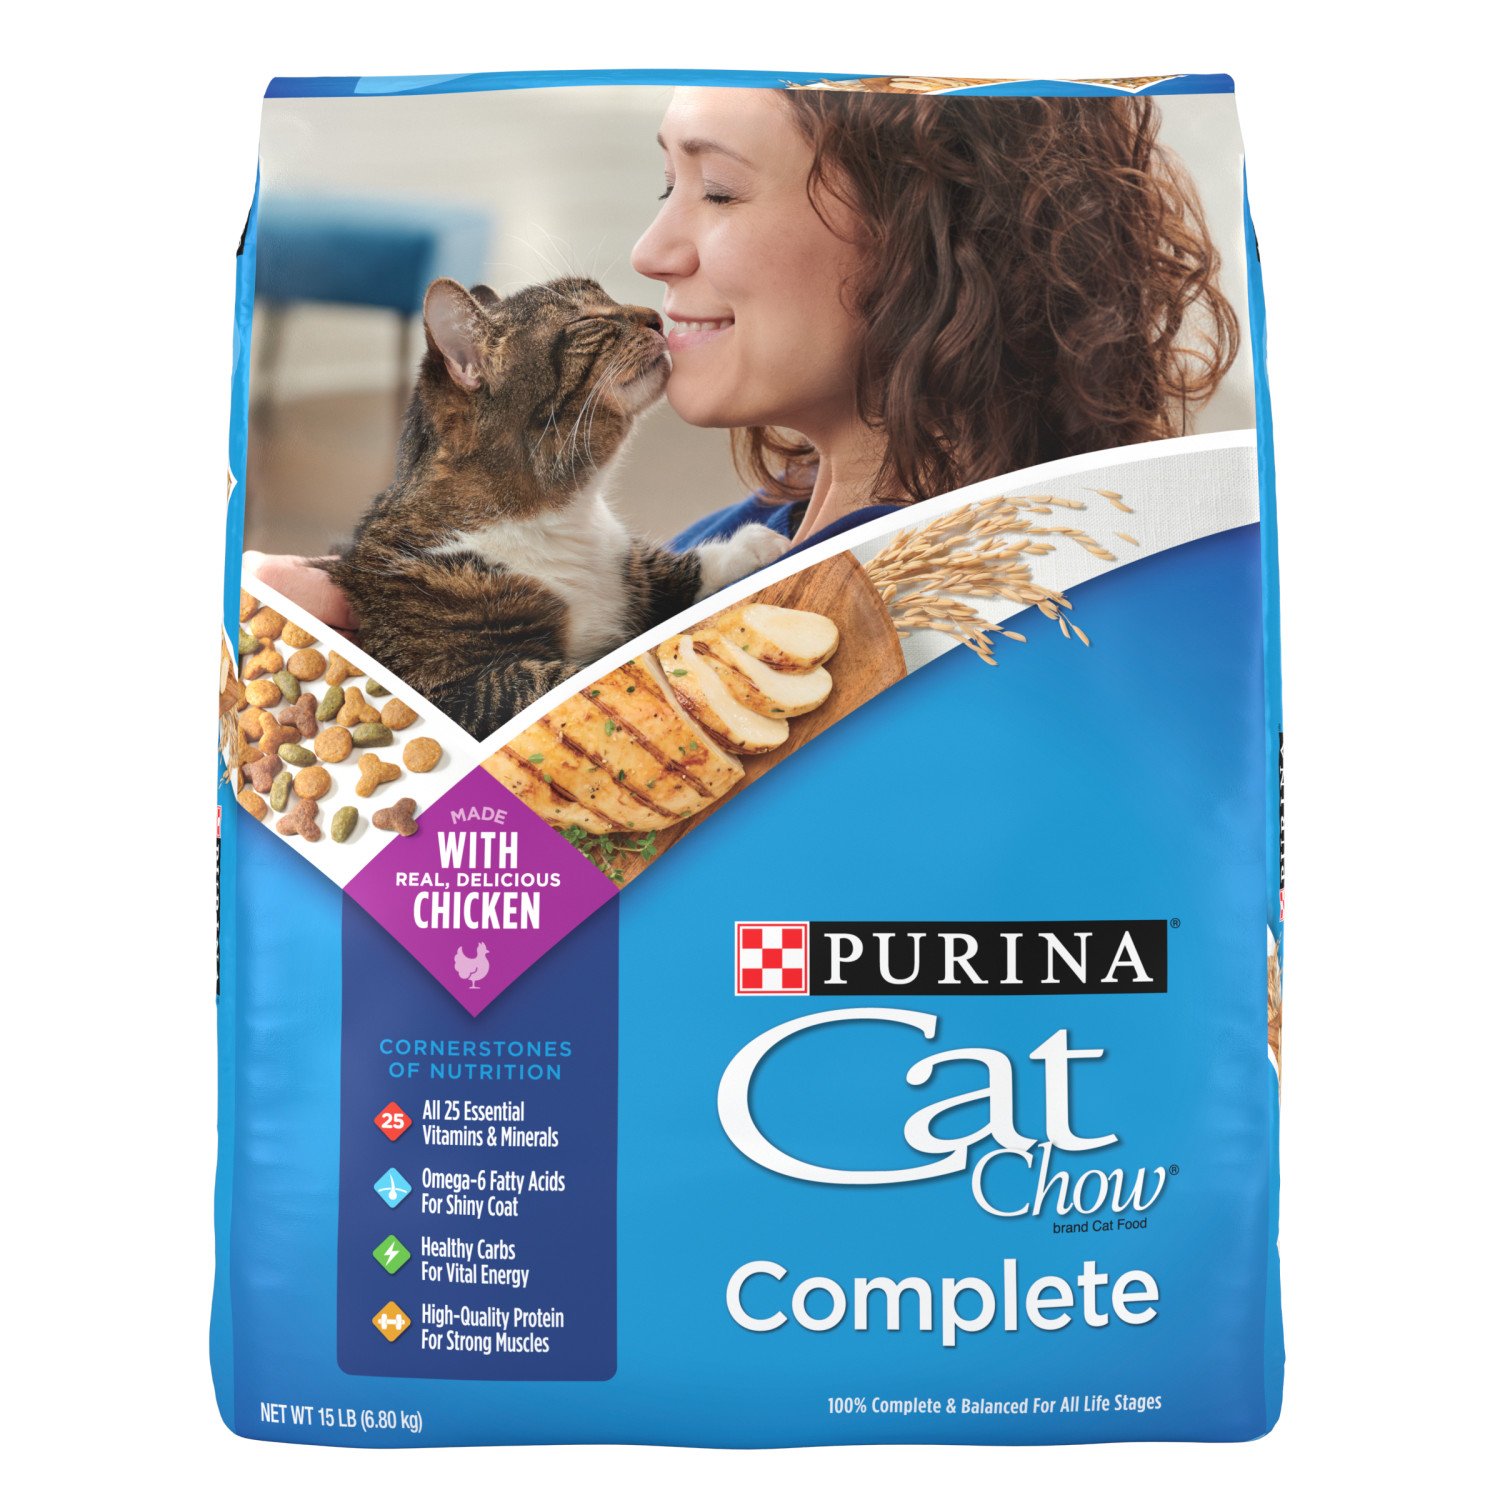 Purina Cat Chow Complete Dry Cat Food Shop Cats at HEB